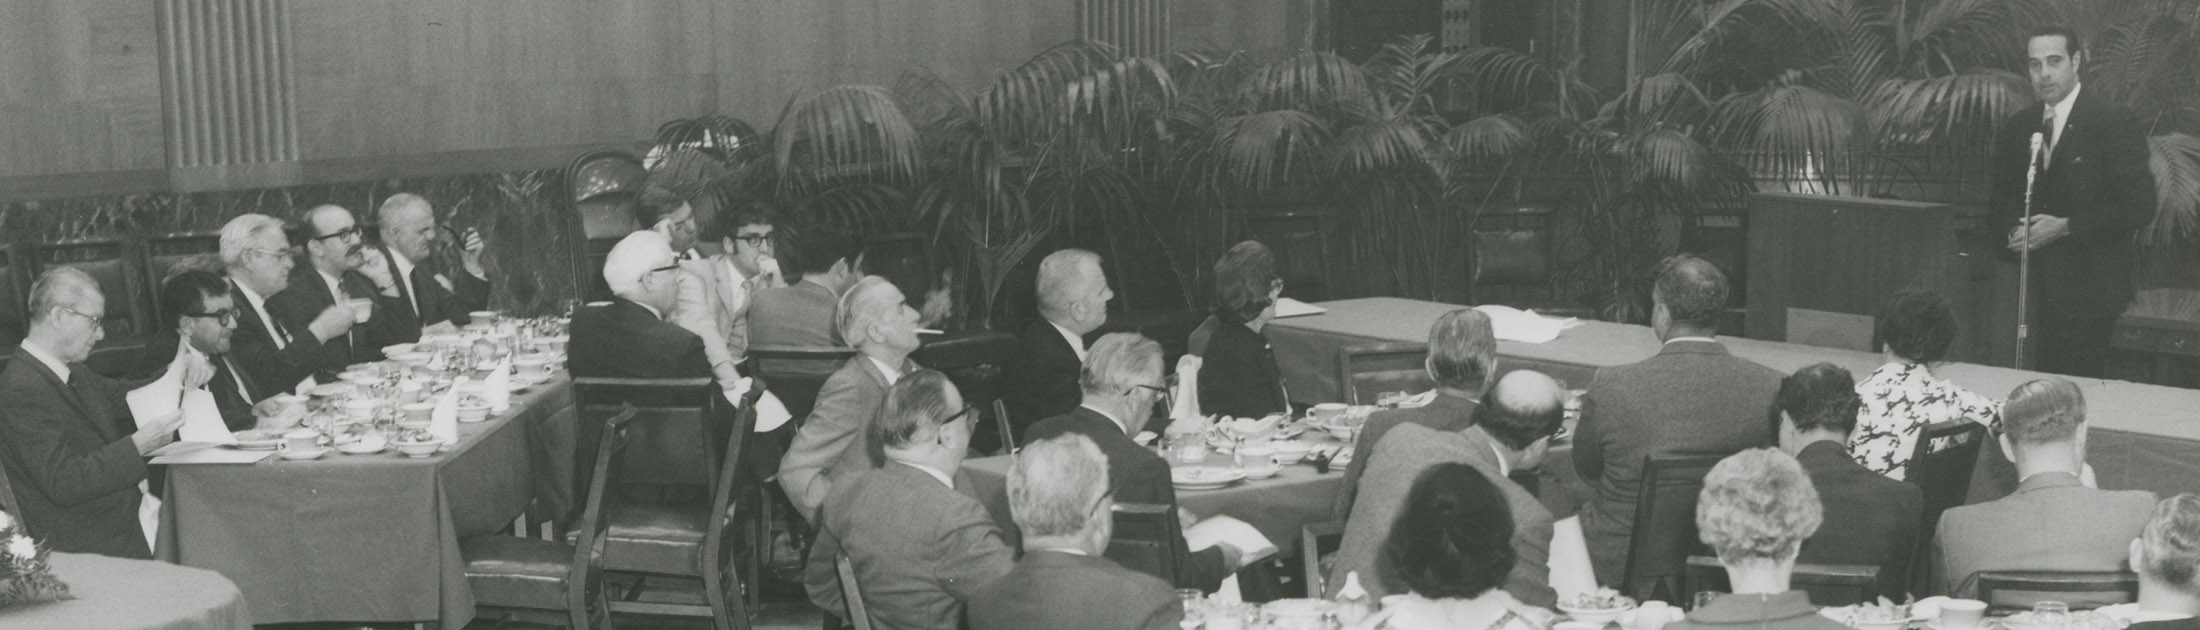 Dole speaking at a luncheon for disability leaders, 1969